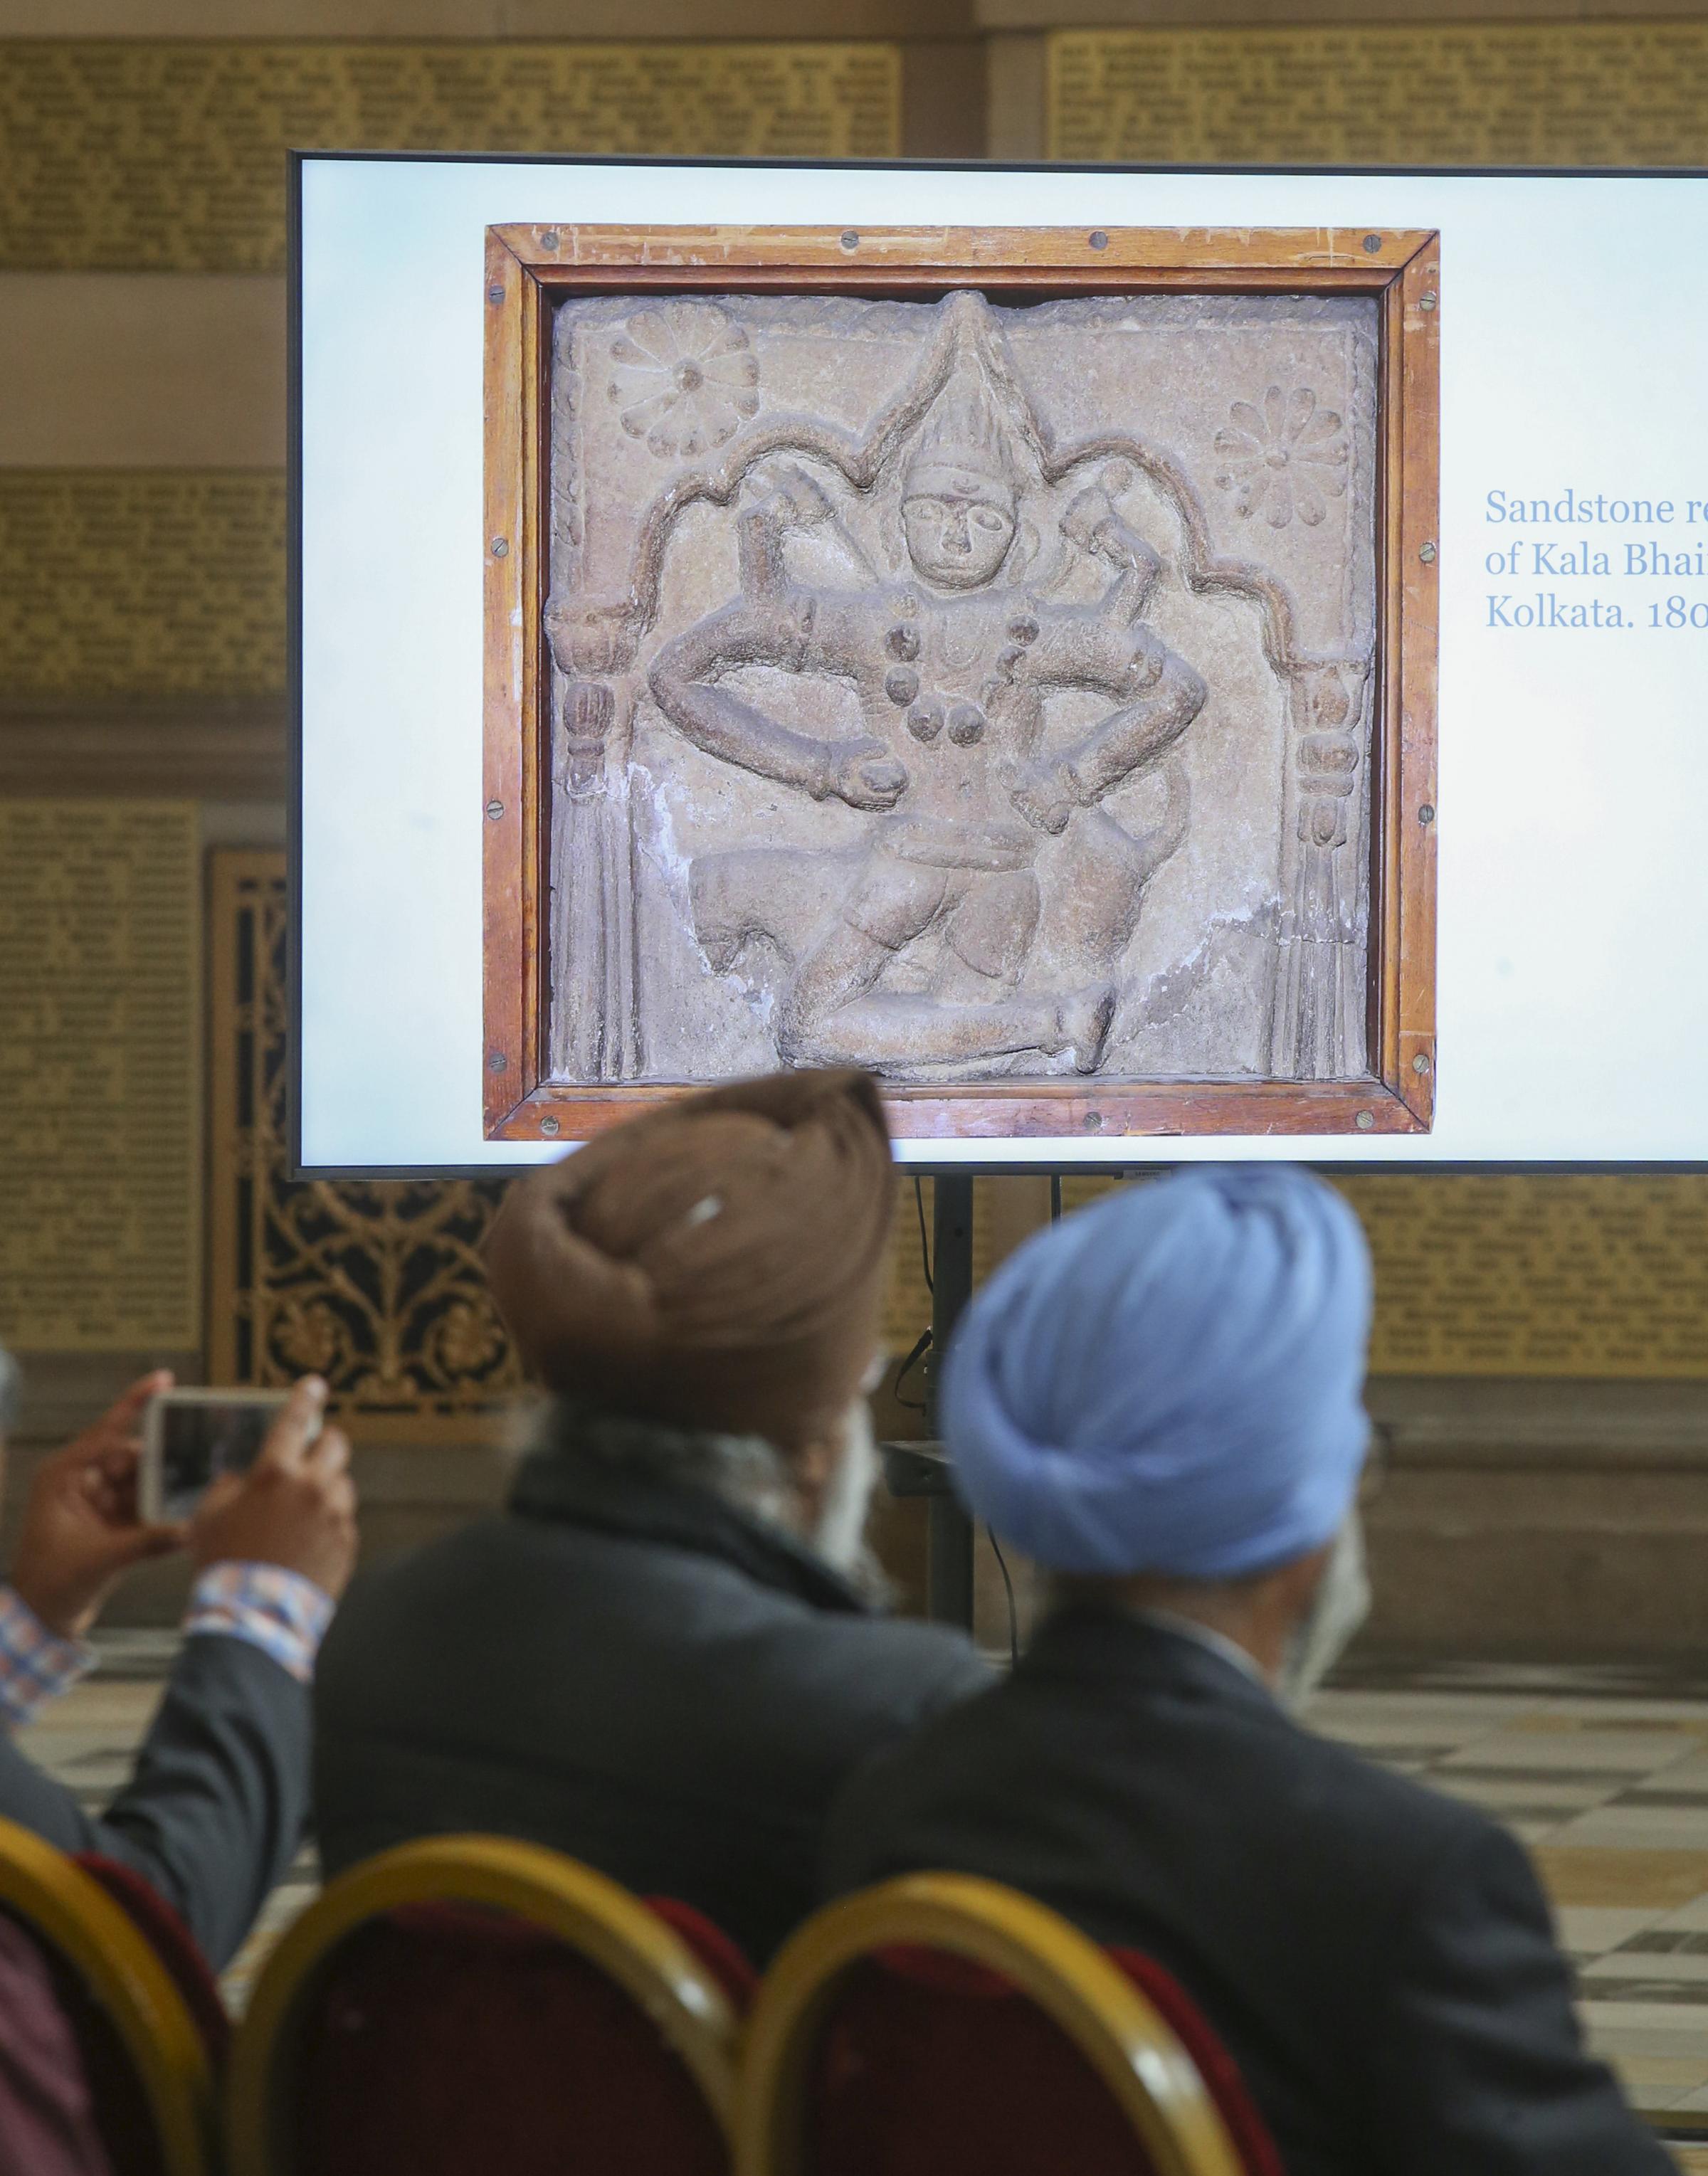 A signing ceremony at Kelvingrove Art Gallery to mark the return of seven Indian antiquities from the city collection. Photo by Gordon Terris.